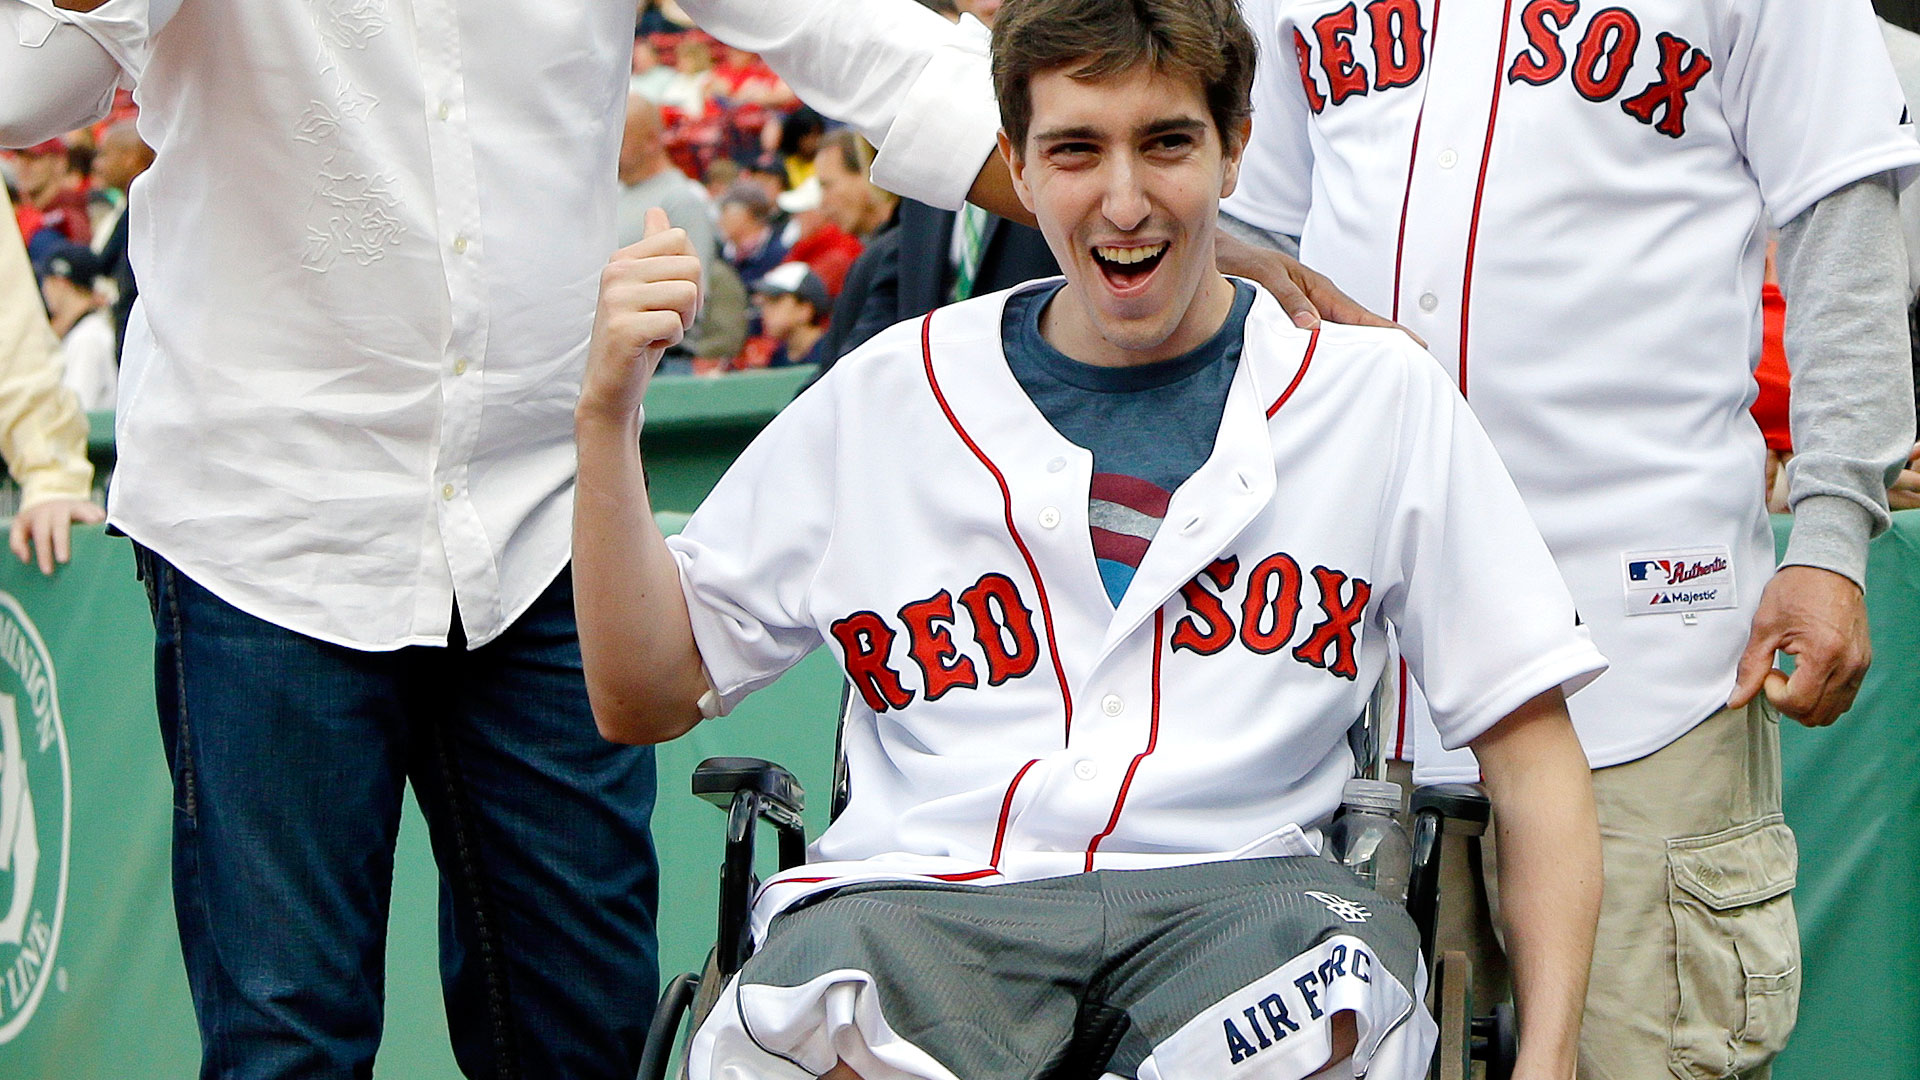 Boston Marathon bombing victim Jeff Bauman, right, stands with Boston Red  Sox's David Ortiz after throwing out a ceremonial first pitch following  ceremonies to honor Ortiz before a baseball game against the